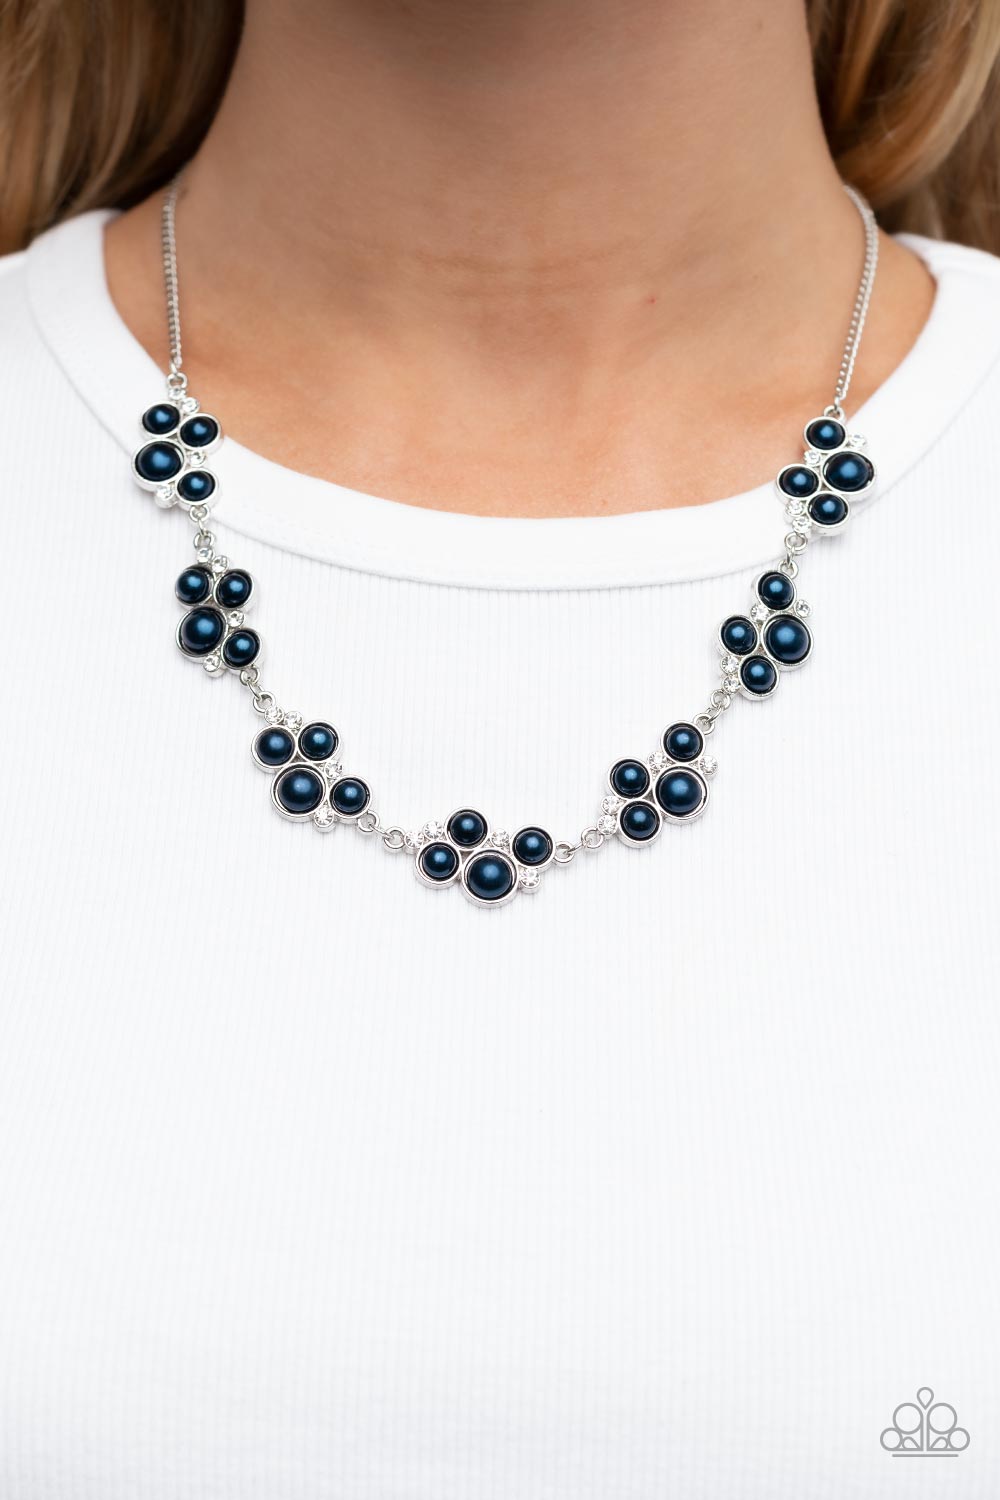 GRACE to the Top - Blue Pearls & White Rhinestone Cluster Paparazzi Necklace & matching earrings